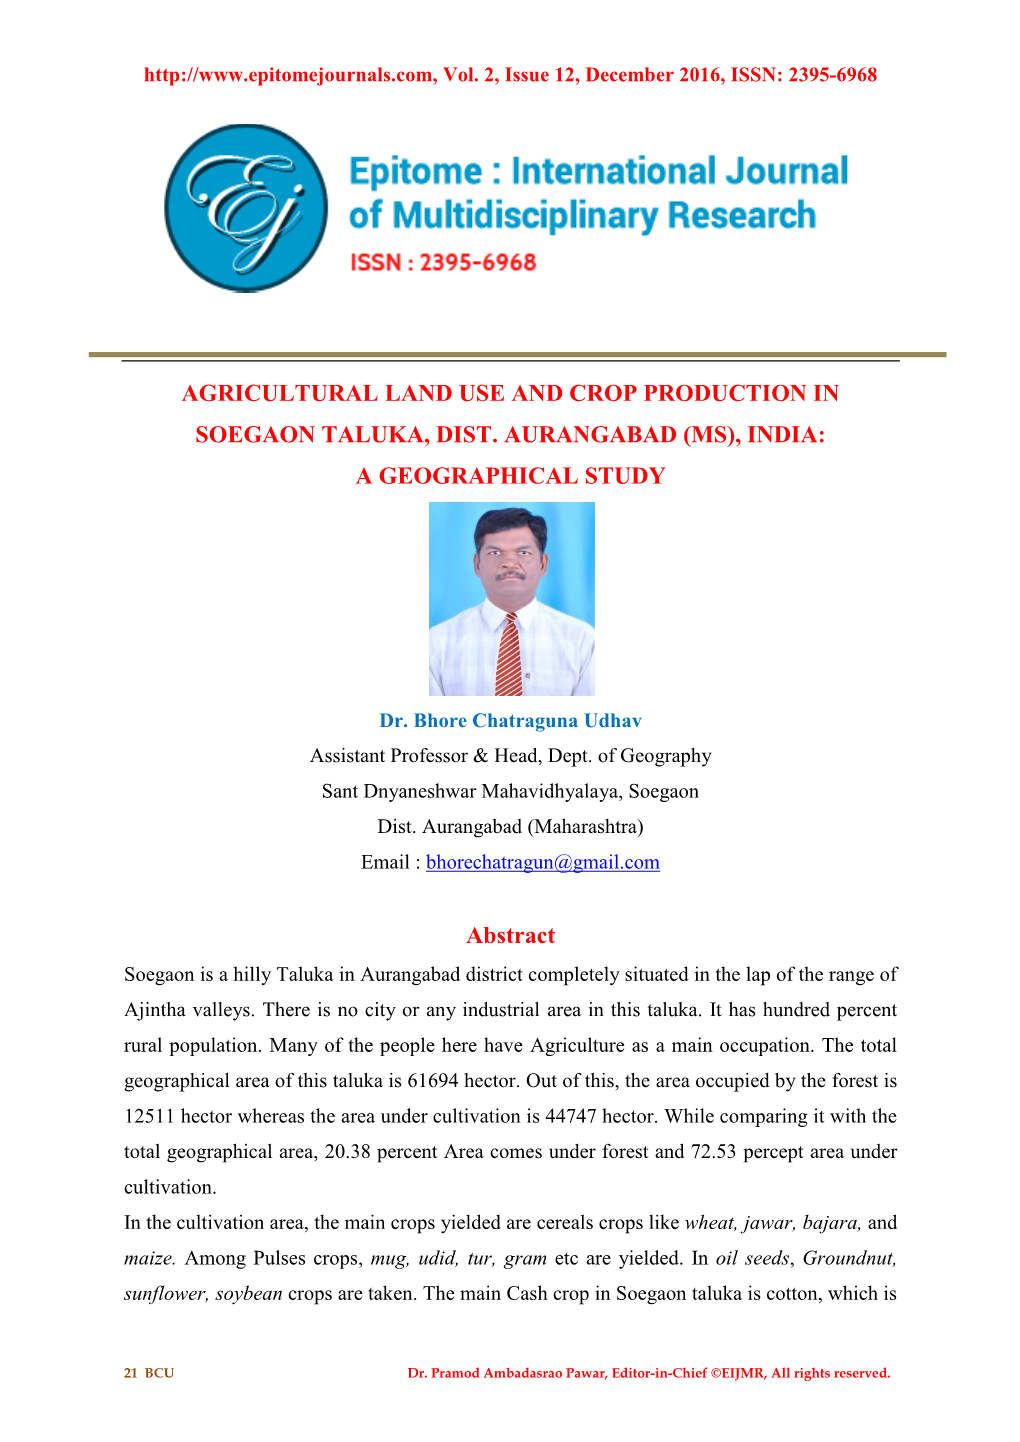 Agricultural Land Use and Crop Production in Soegaon Taluka, Dist